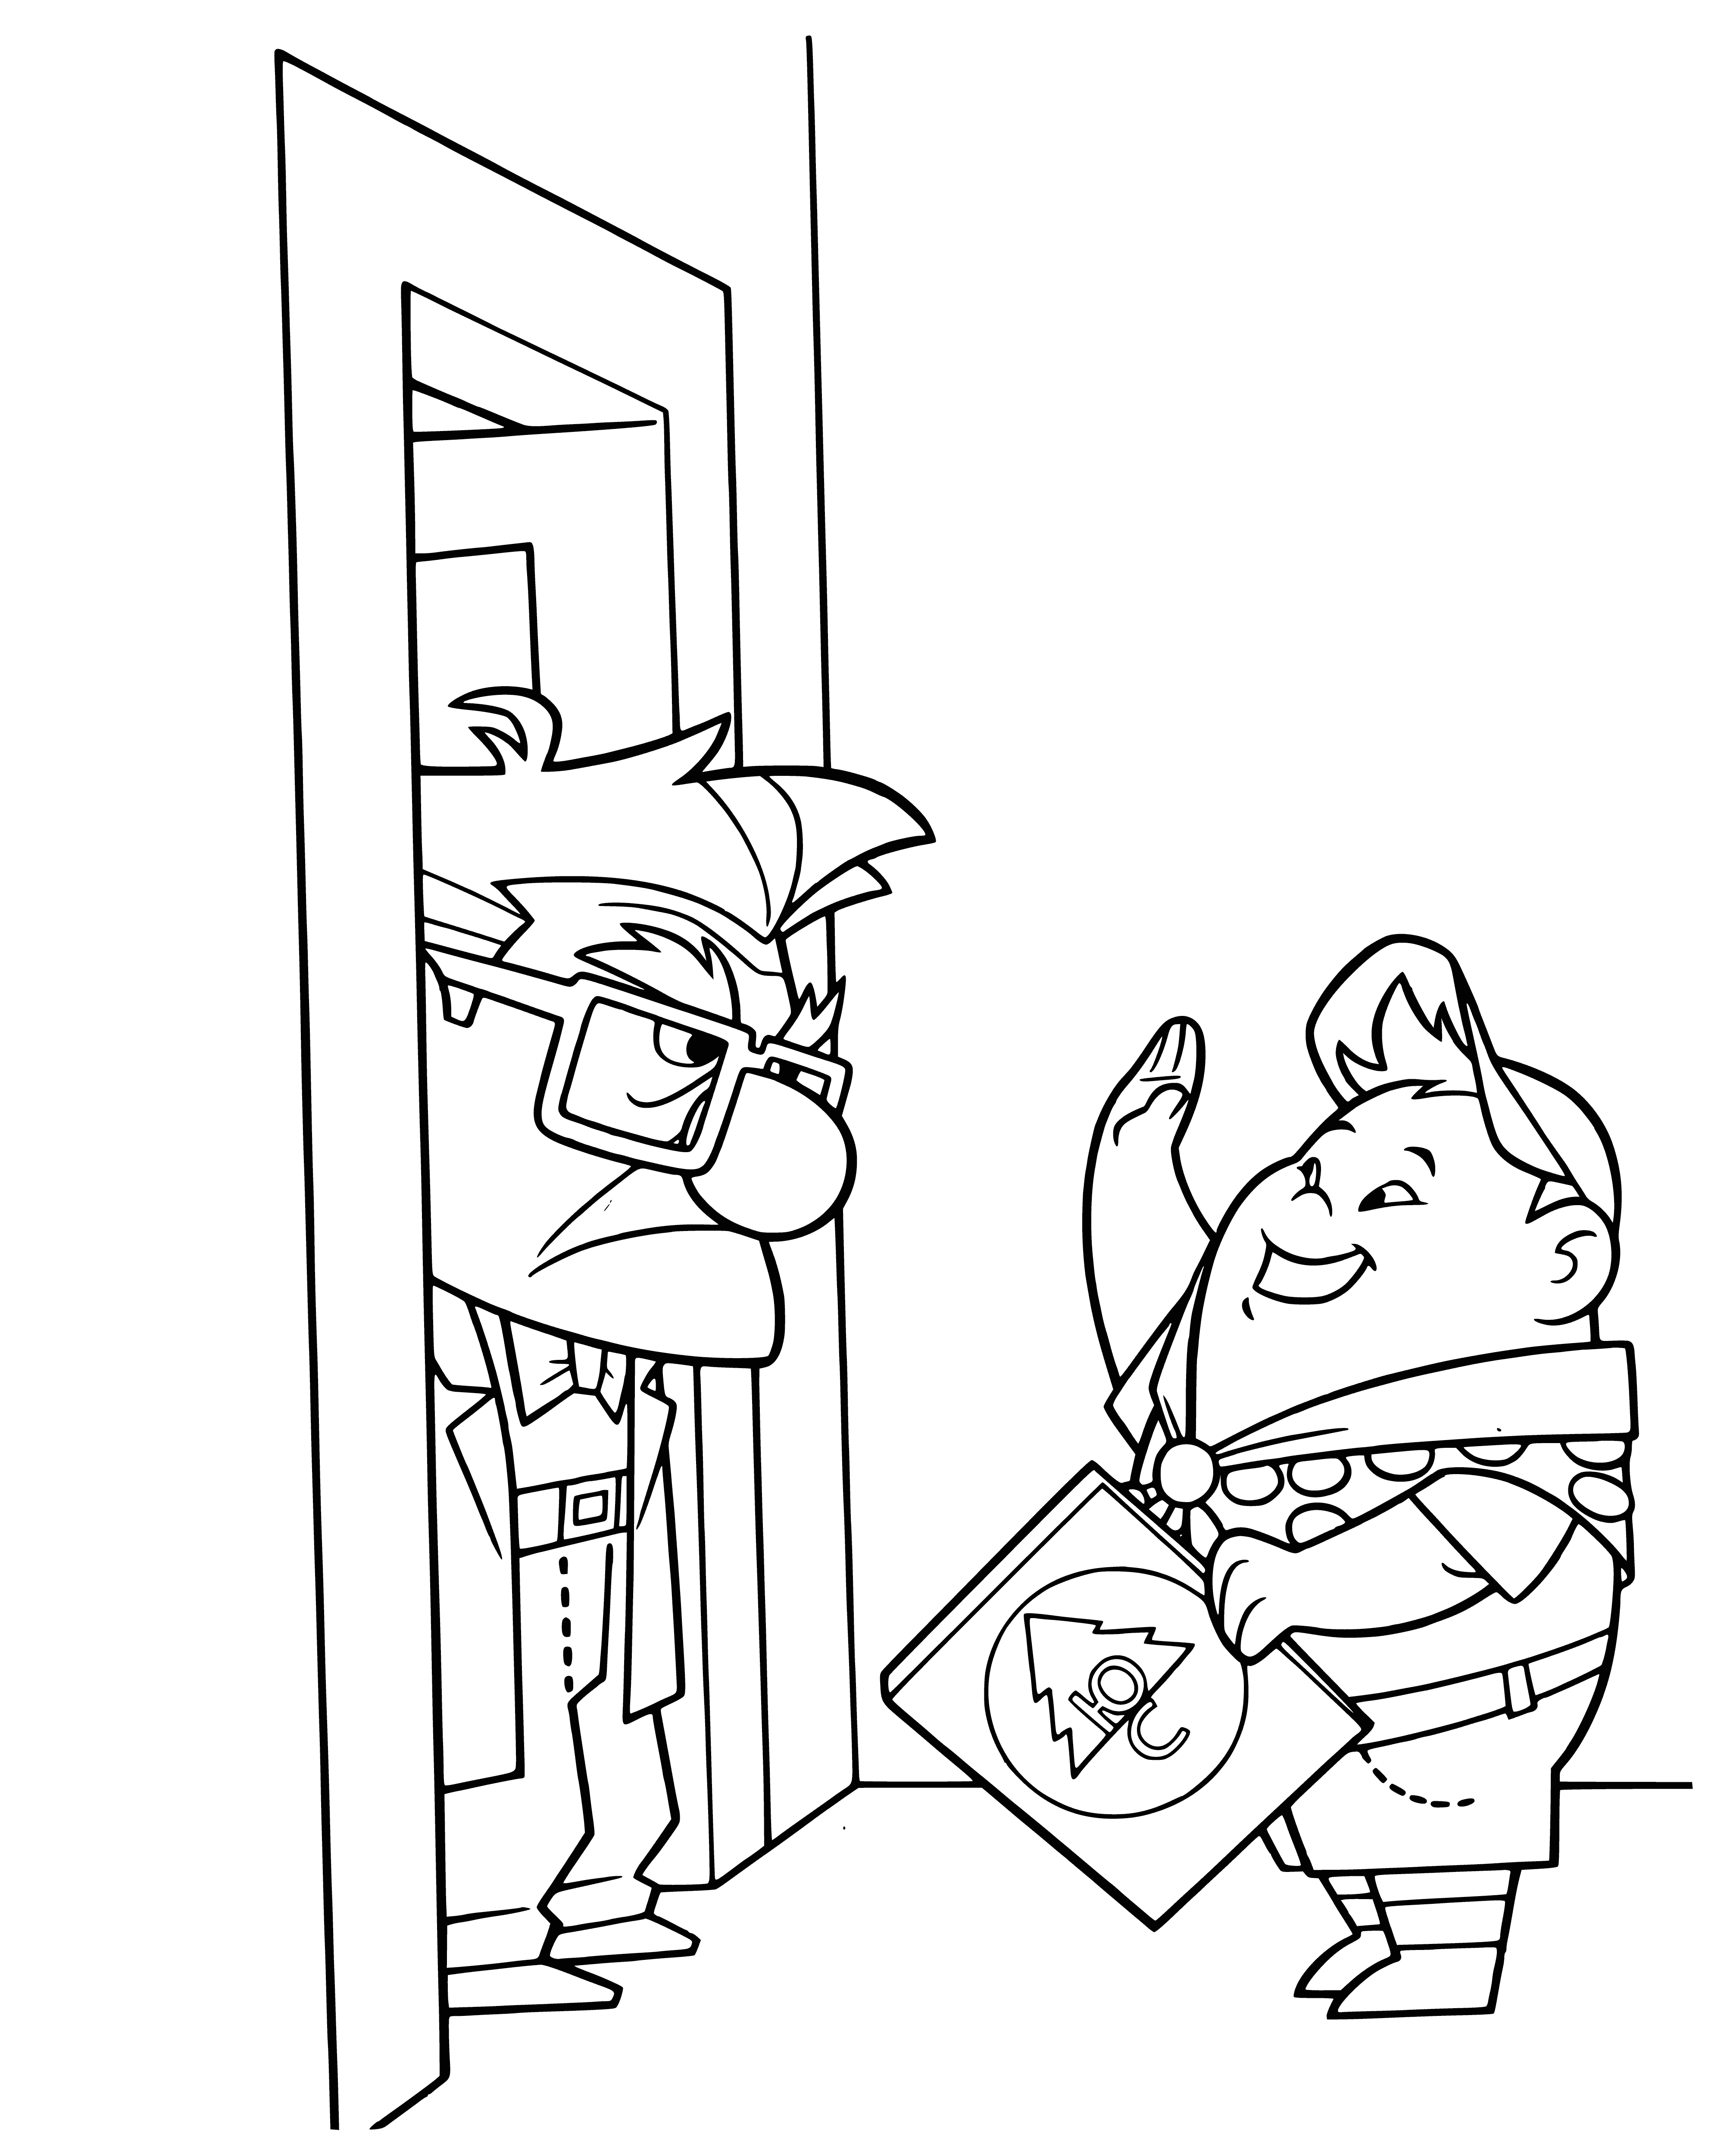 This is Russell coloring page